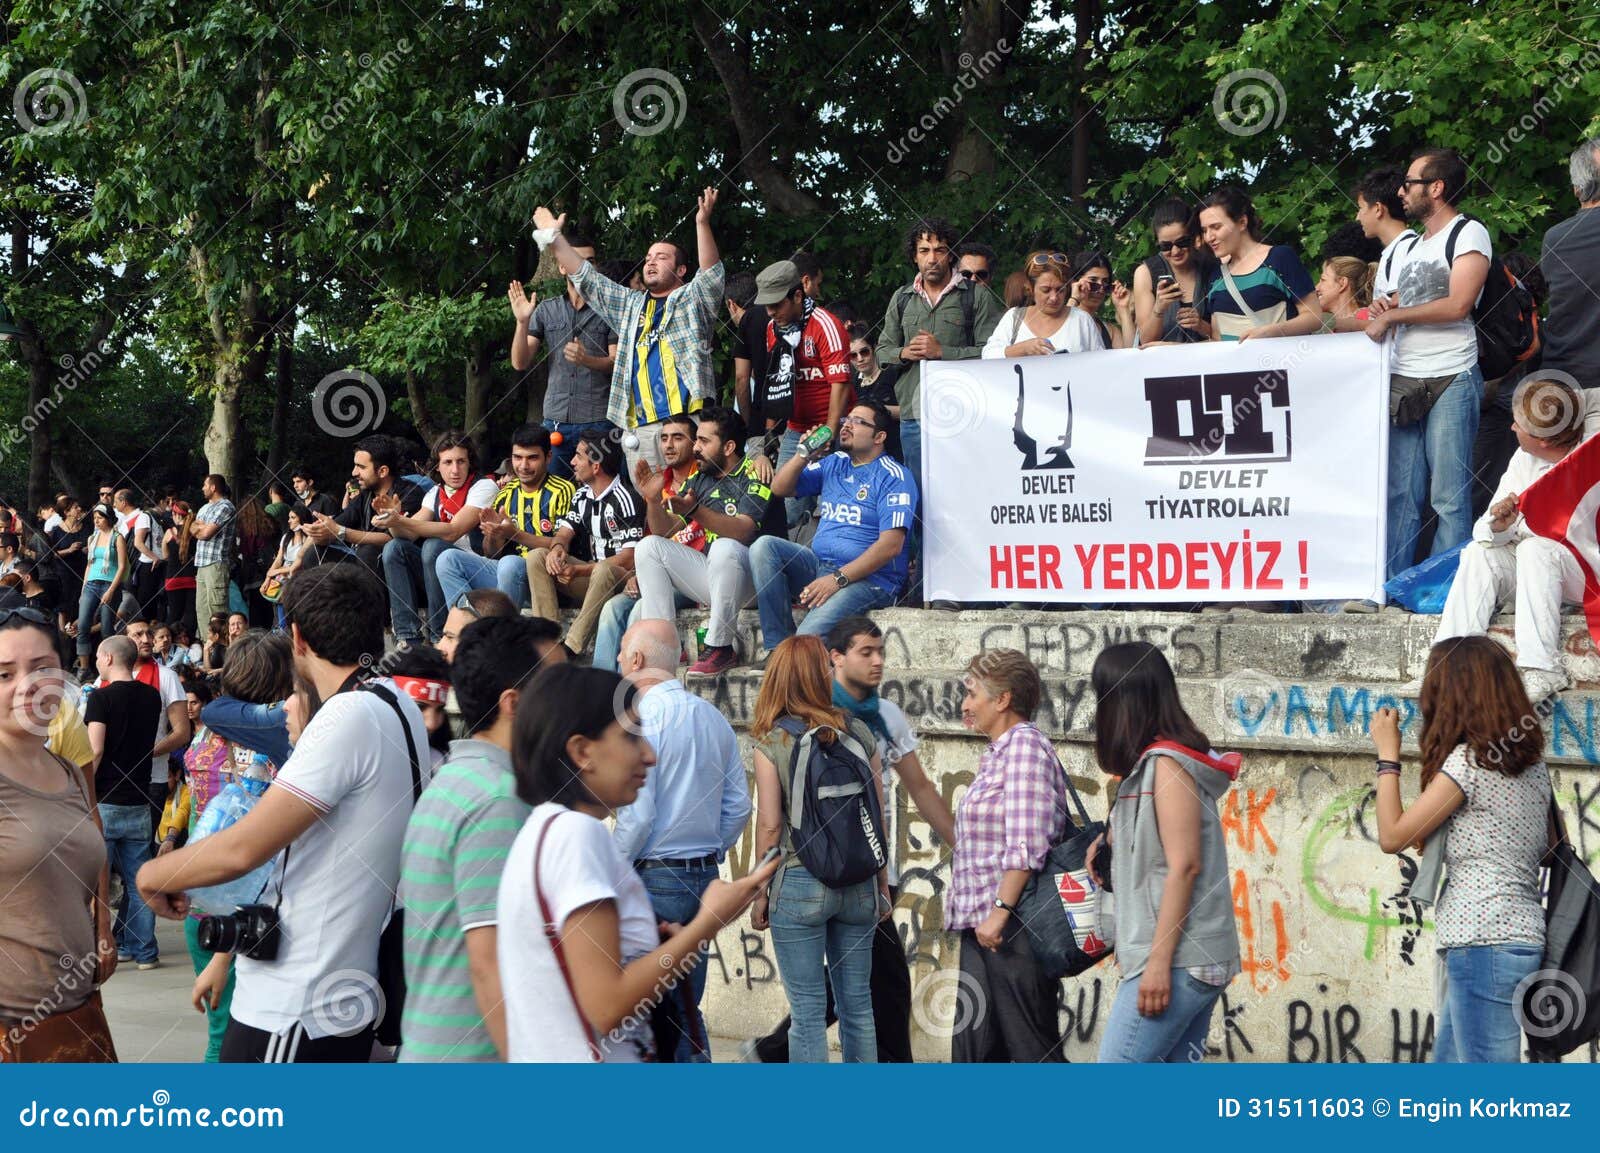 Gezi Park Protests In Istanbul Editorial Stock Photo Image Of